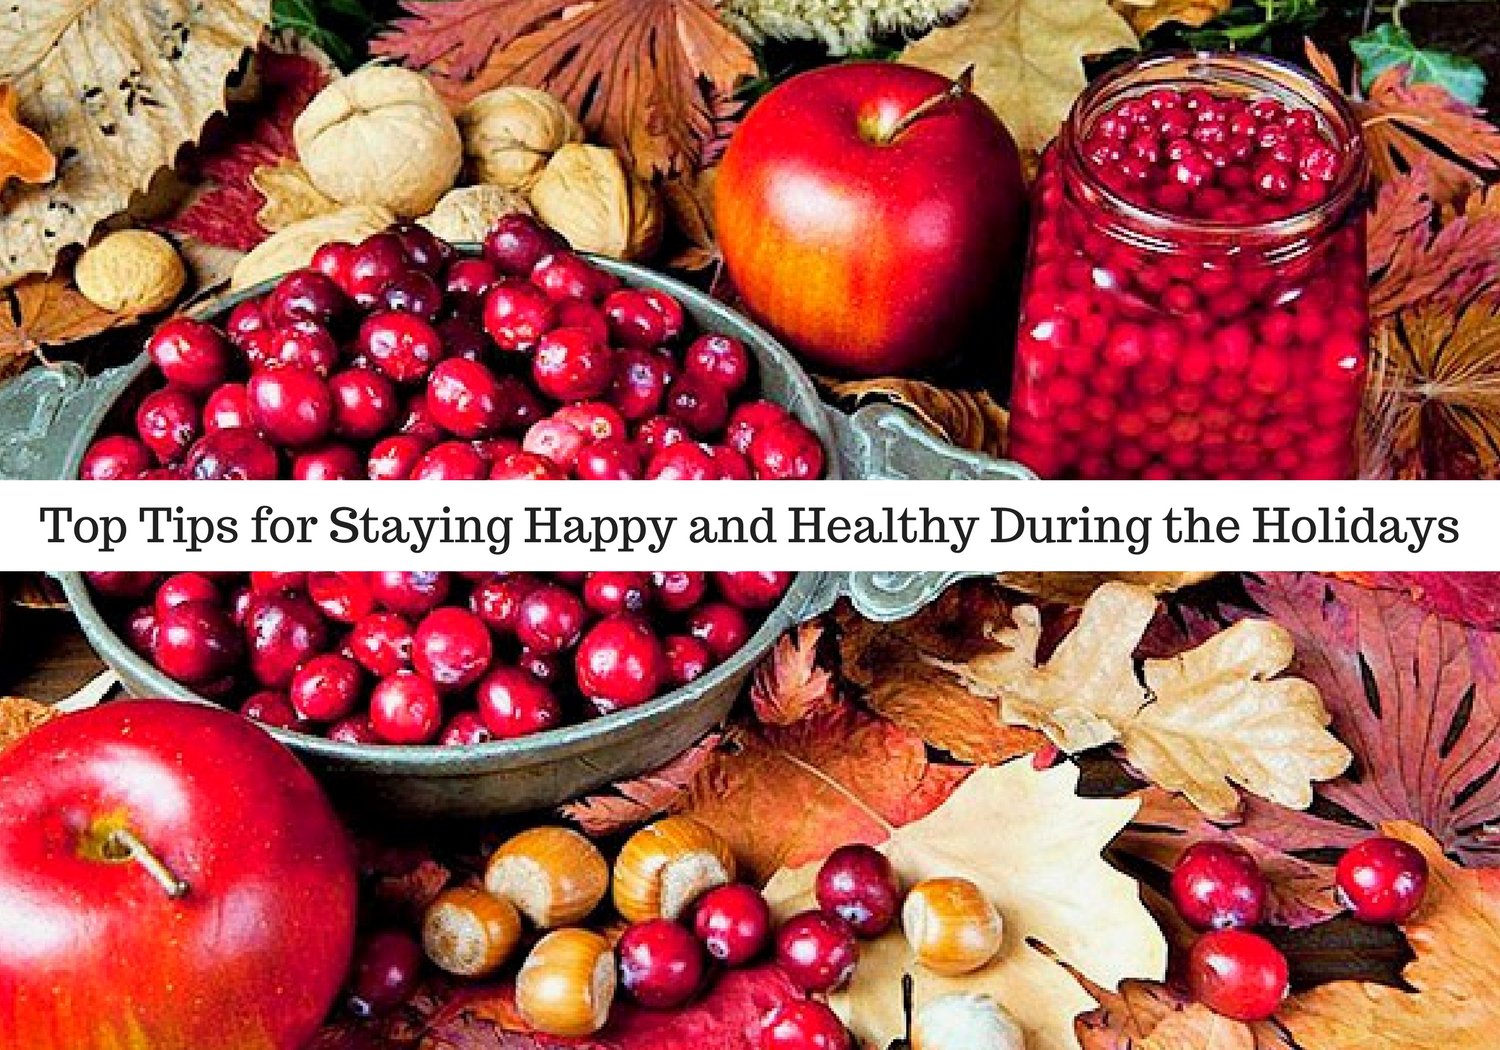 Top Tips for Staying Happy and Healthy During the Holidays